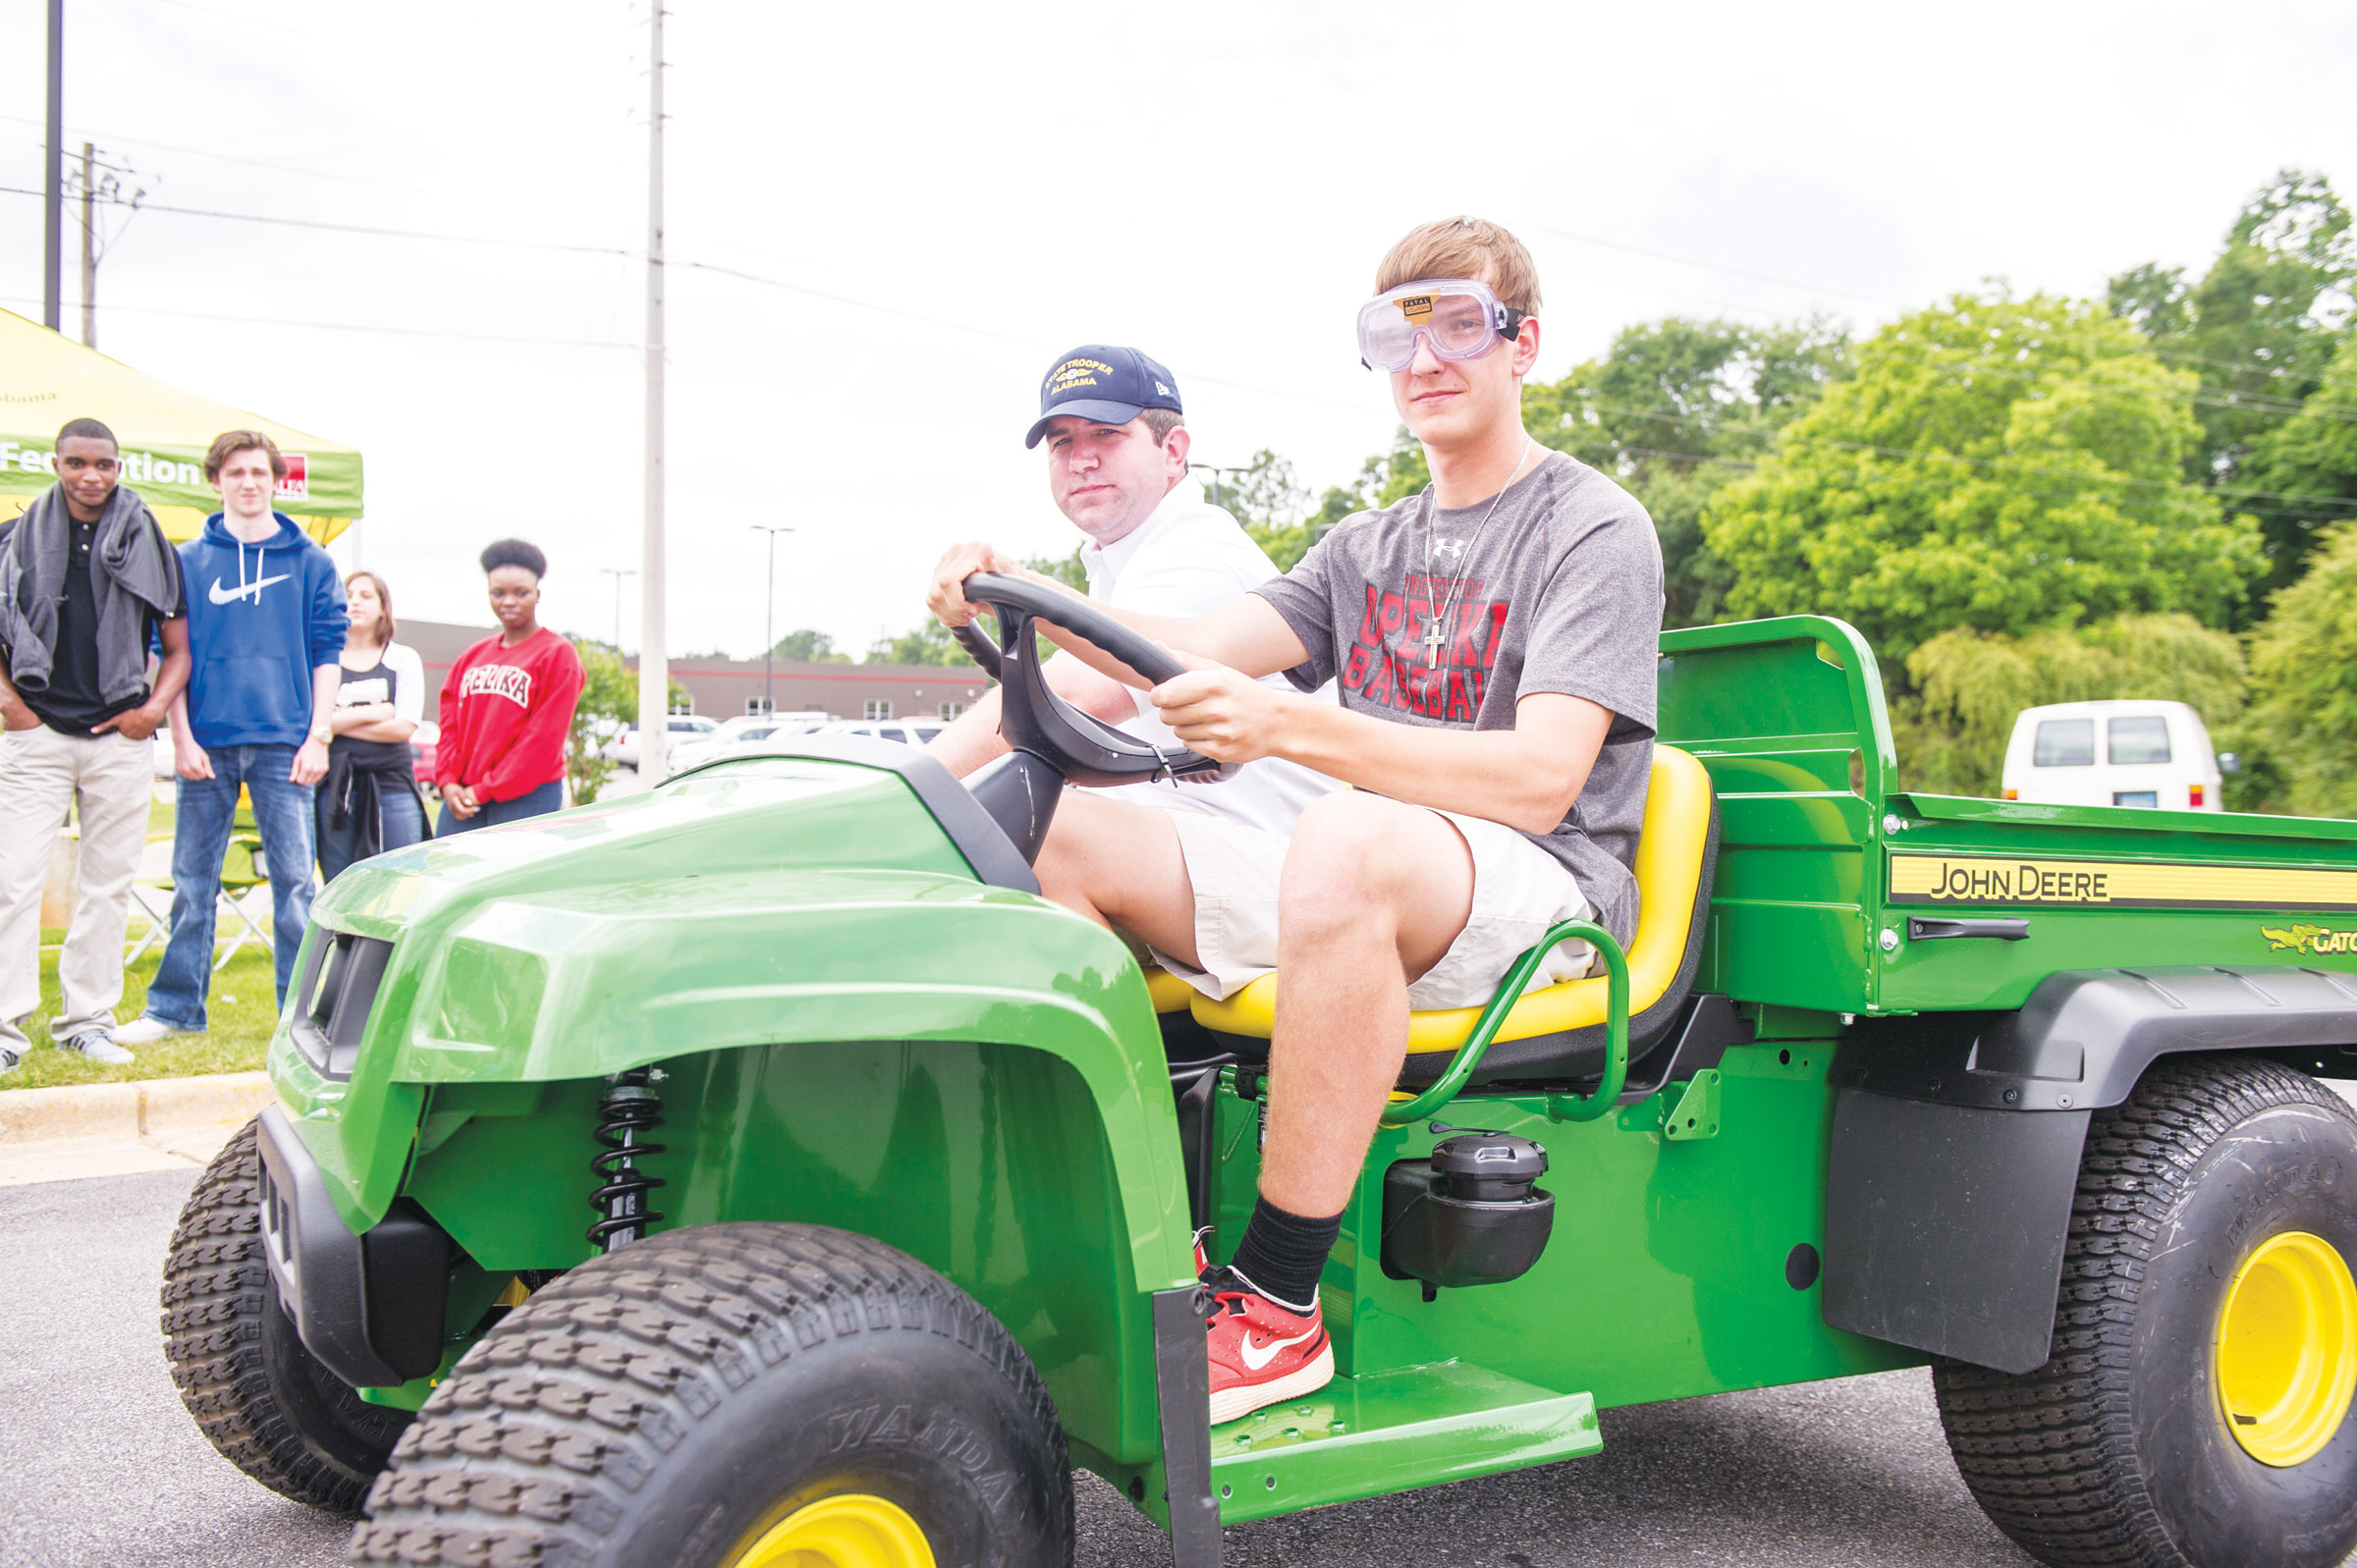 OHS students participate in ‘Fatal Vision’ exercise